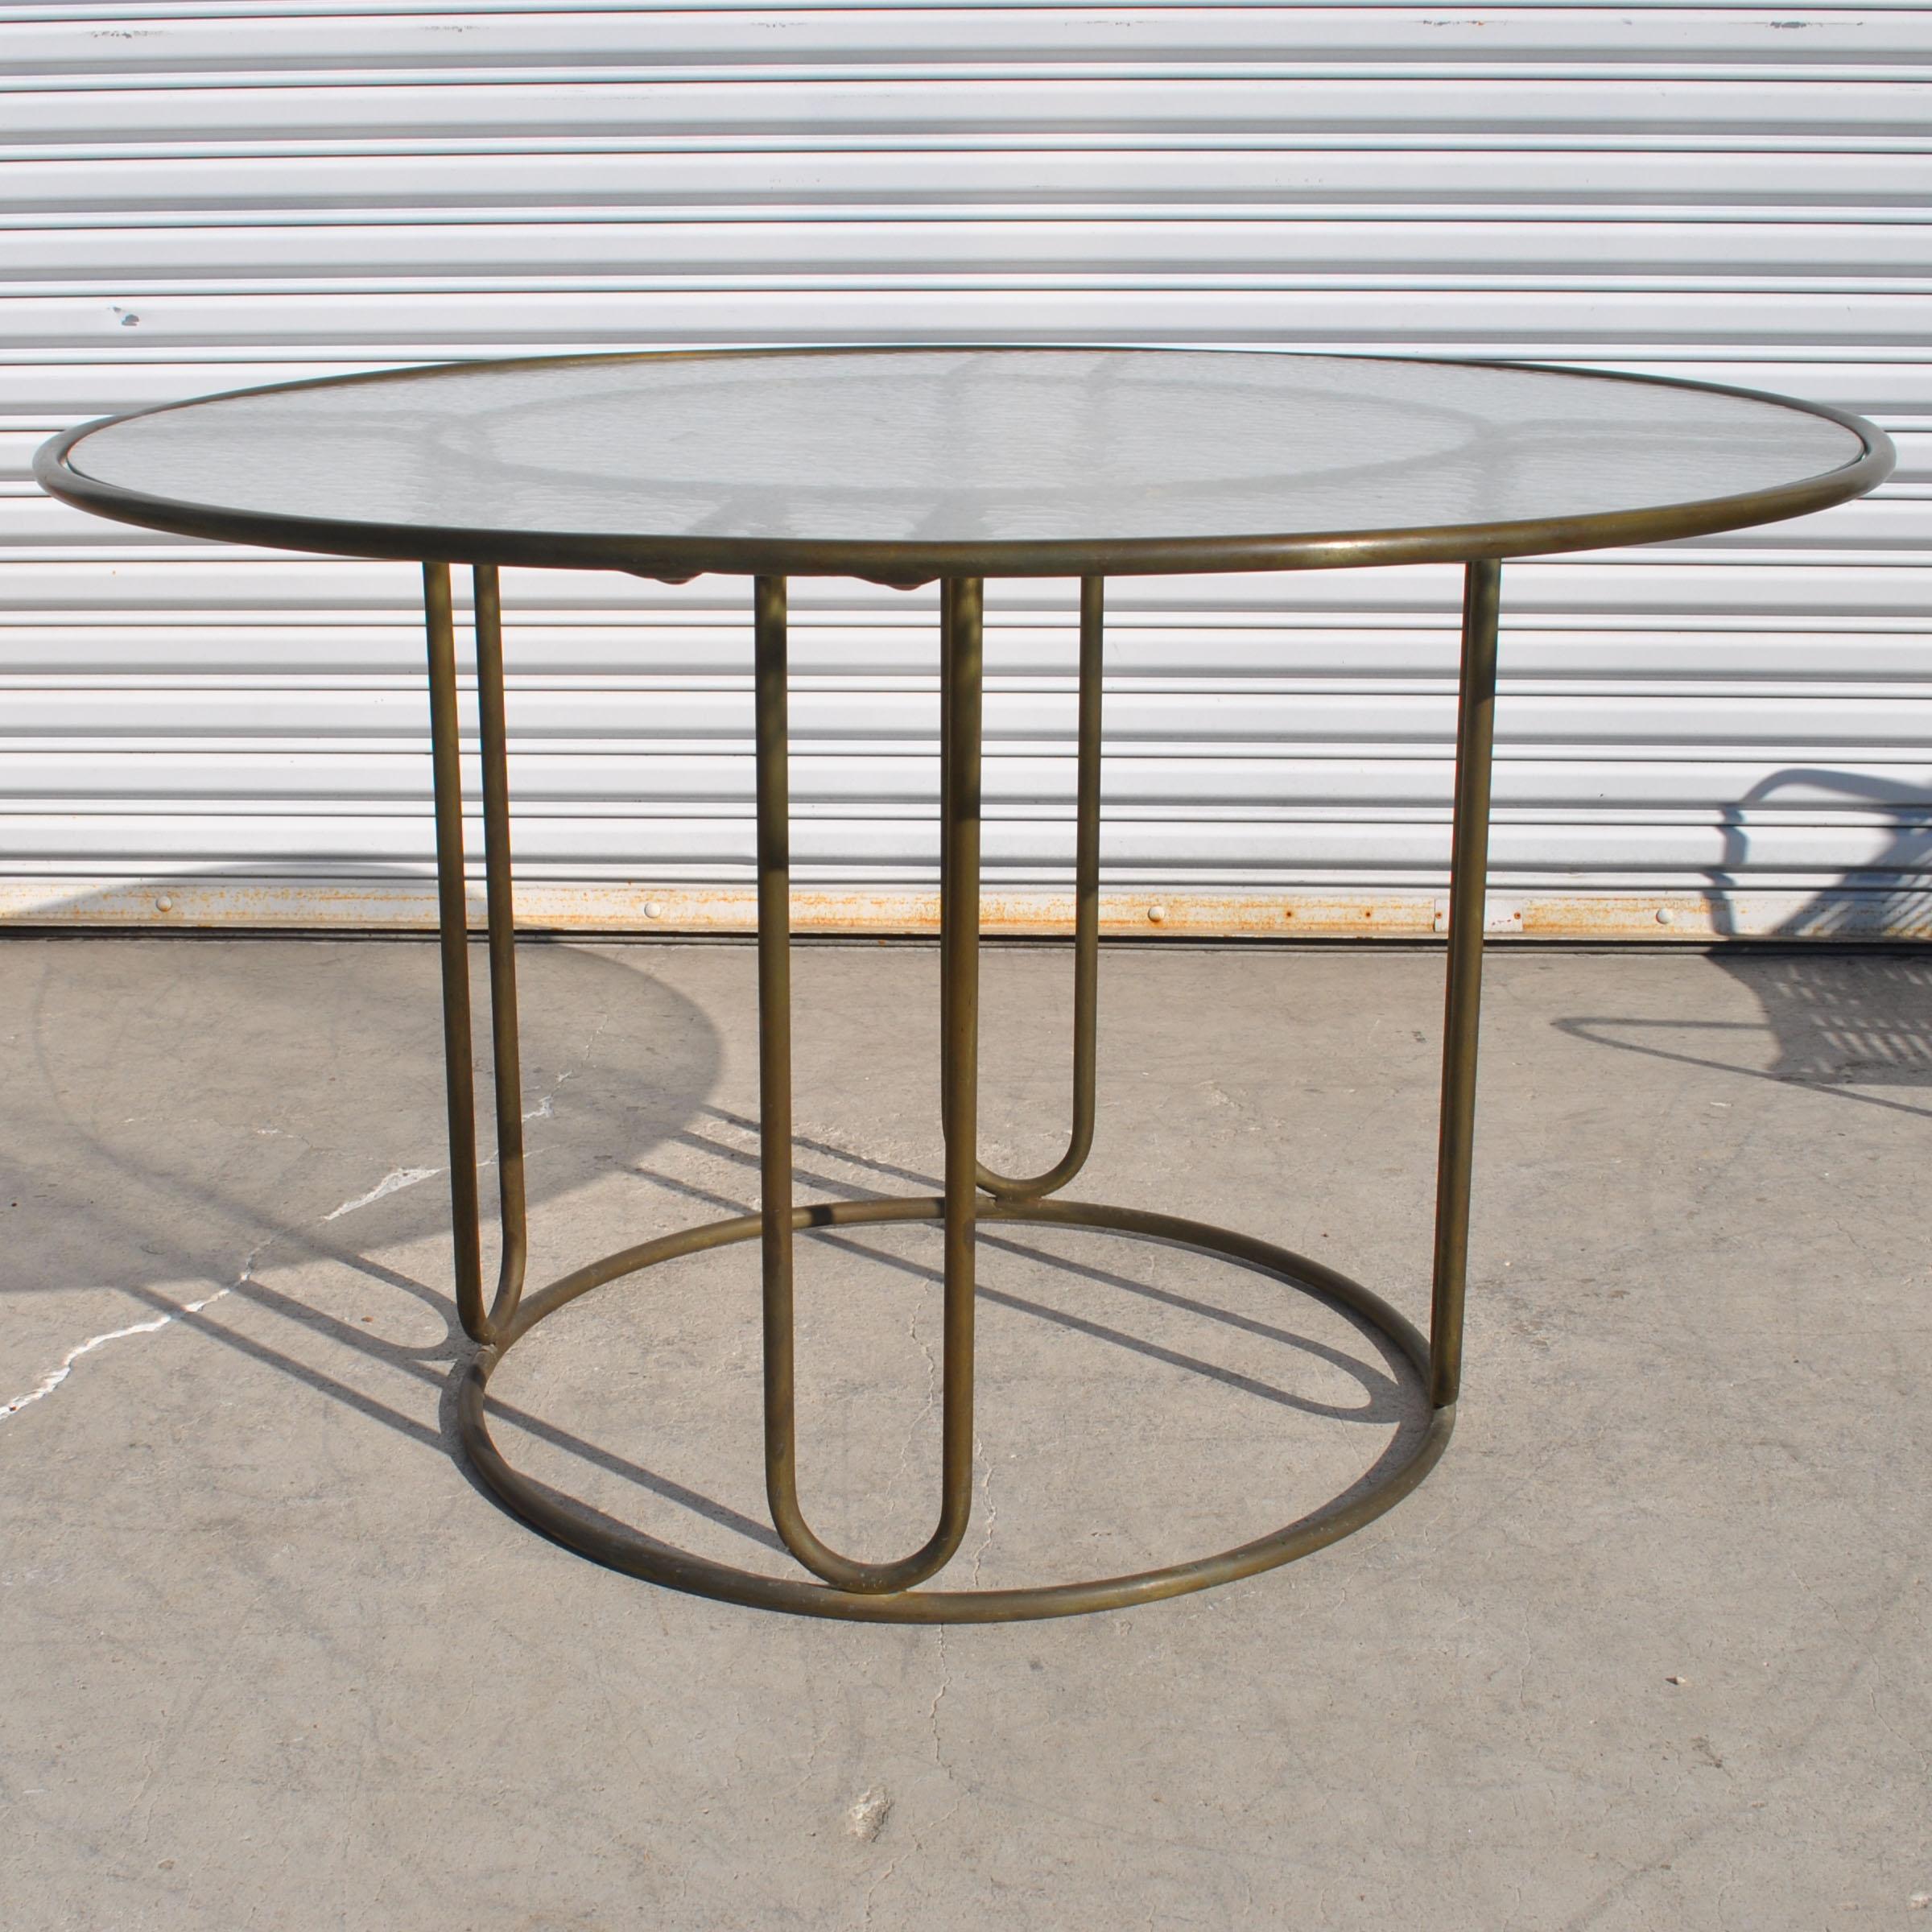 While living in Honolulu post WW2, Walter Lamb was involved in the salvage effort in Pearl Harbor. From materials reclaimed from sunken ships, (copper and bronze tubing) he designed classic pieces of indoor/outdoor furniture which proved to be